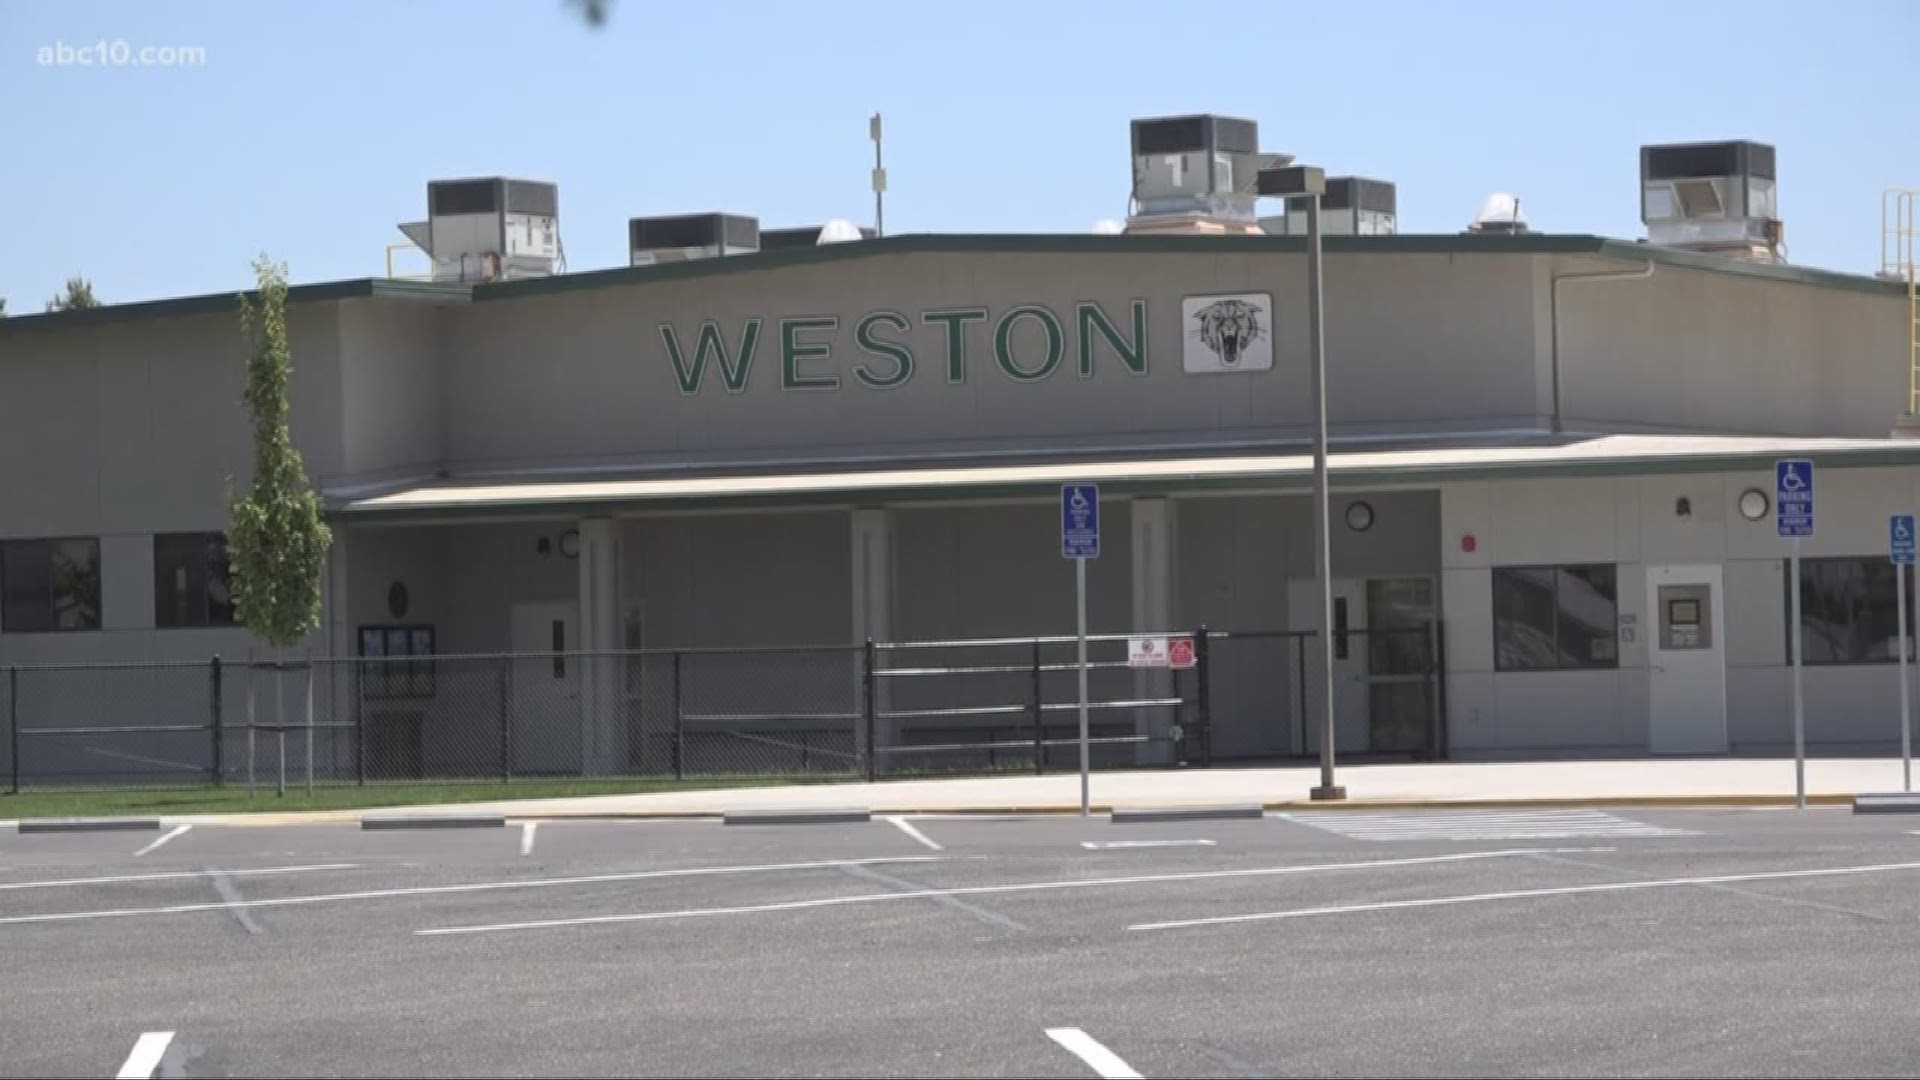 Several parents claim the cell tower at Weston Elementary is the cause of a cancer cluster. City officials deny the claim.